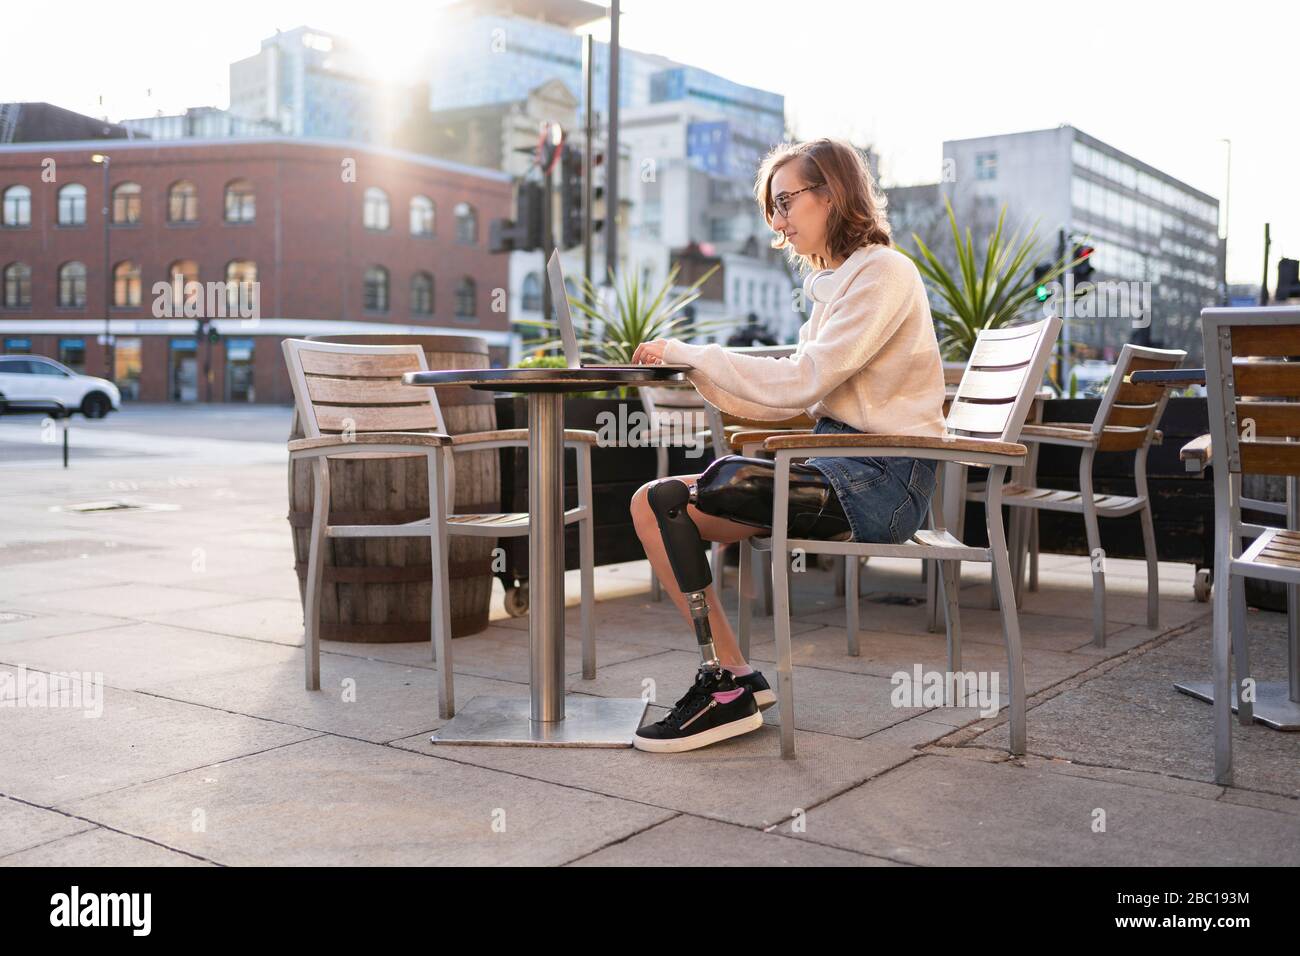 Young woman with leg prosthesis sitting in a sidewalk cafe in the city using laptop Stock Photo